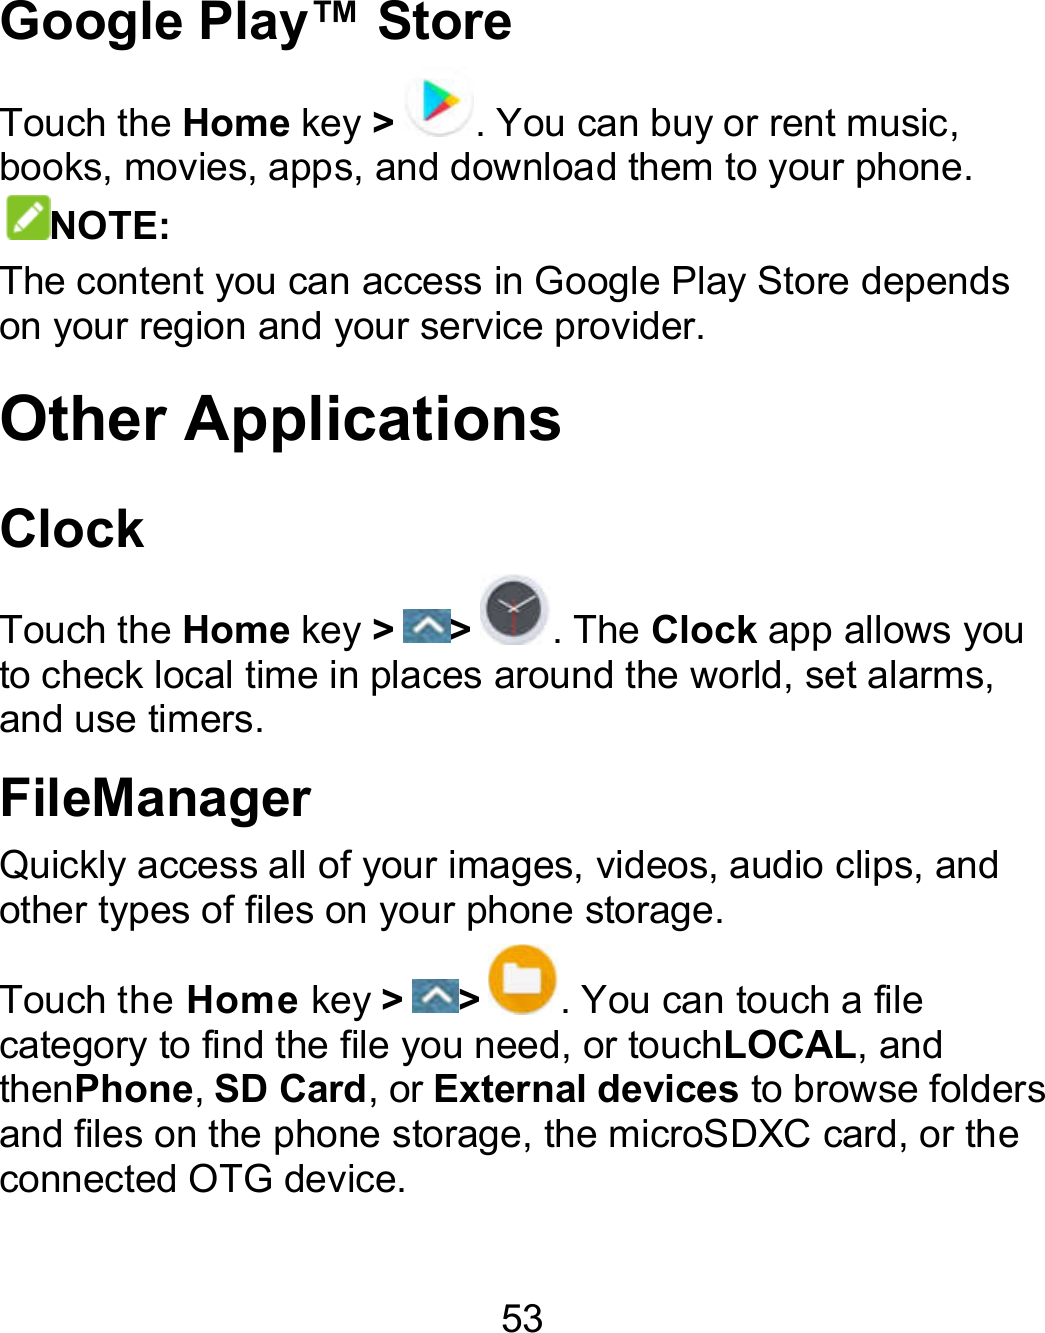 53 Google Play™ Store Touch the Home key &gt;. You can buy or rent music, books, movies, apps, and download them to your phone. NOTE: The content you can access in Google Play Store depends on your region and your service provider. Other Applications Clock Touch the Home key &gt; &gt; . The Clock app allows you to check local time in places around the world, set alarms, and use timers. FileManager Quickly access all of your images, videos, audio clips, and other types of files on your phone storage. Touch the Home key &gt; &gt; . You can touch a file category to find the file you need, or touchLOCAL, and thenPhone, SD Card, or External devices to browse folders and files on the phone storage, the microSDXC card, or the connected OTG device.  